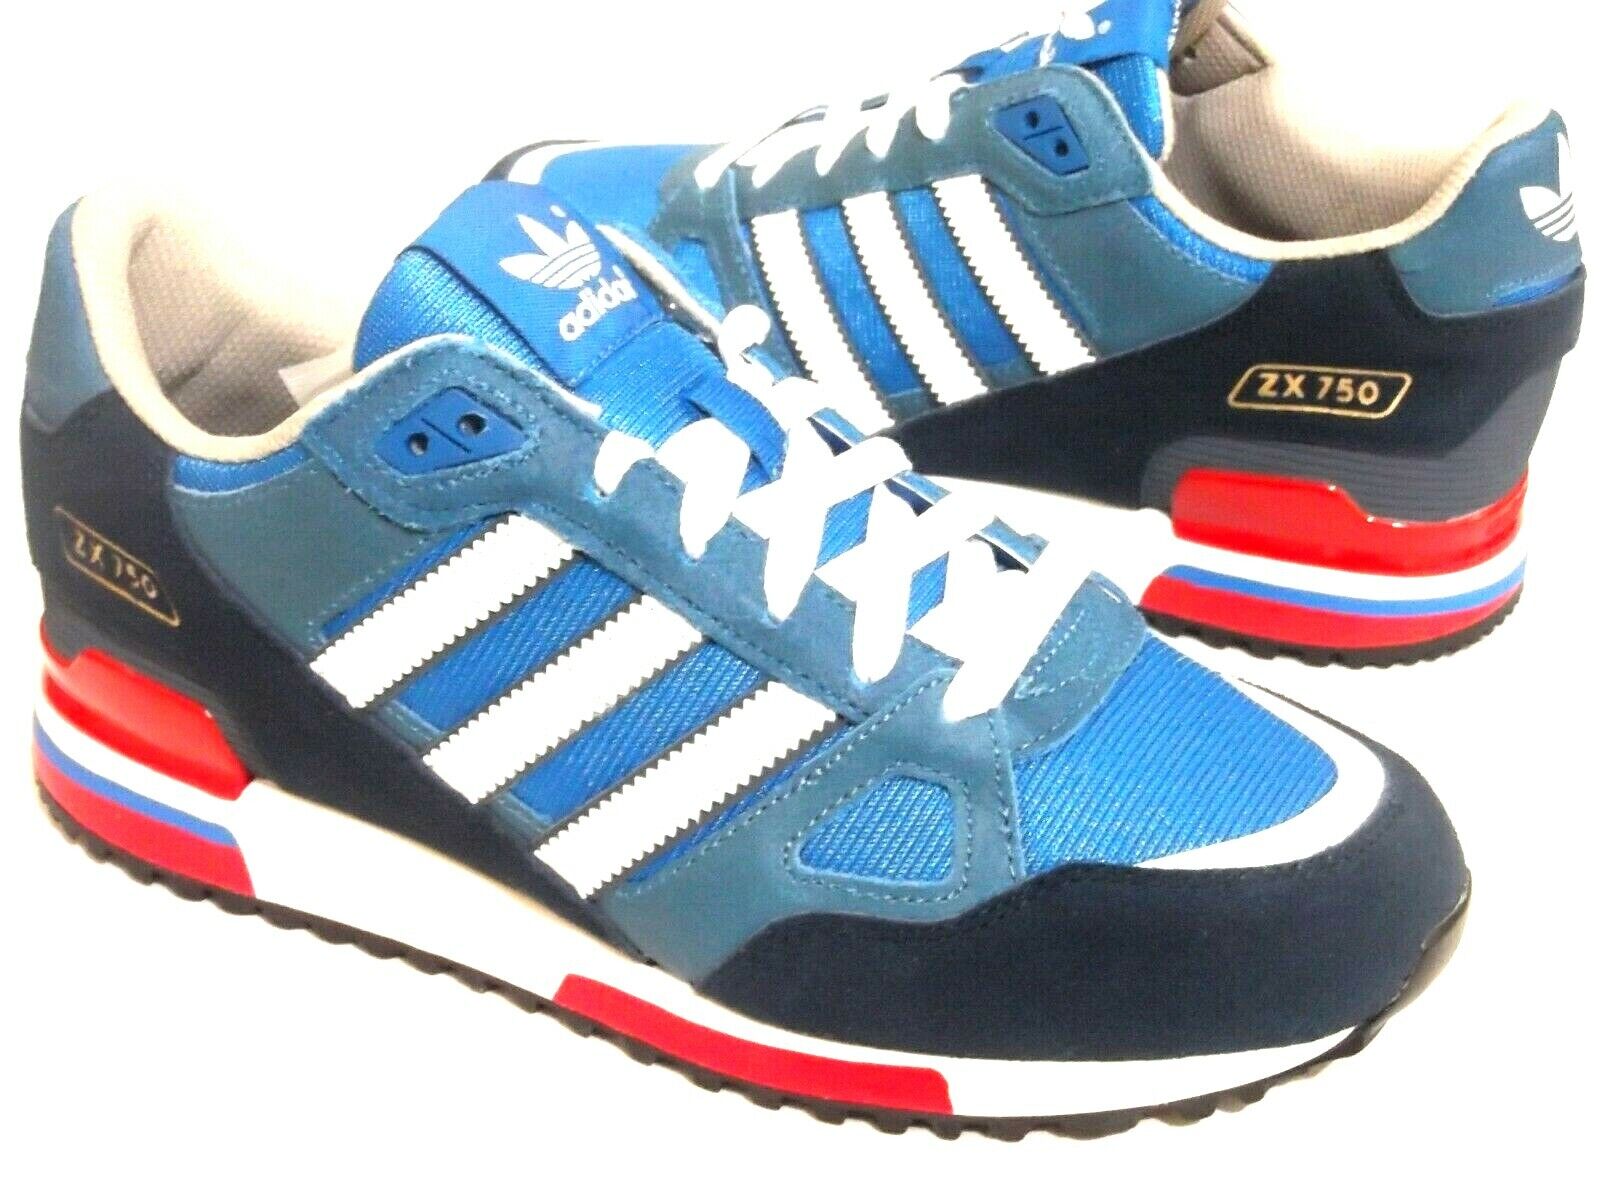 Adidas ZX 750 Originals Mens Shoes Trainers Uk Size 7 to 12 G96718